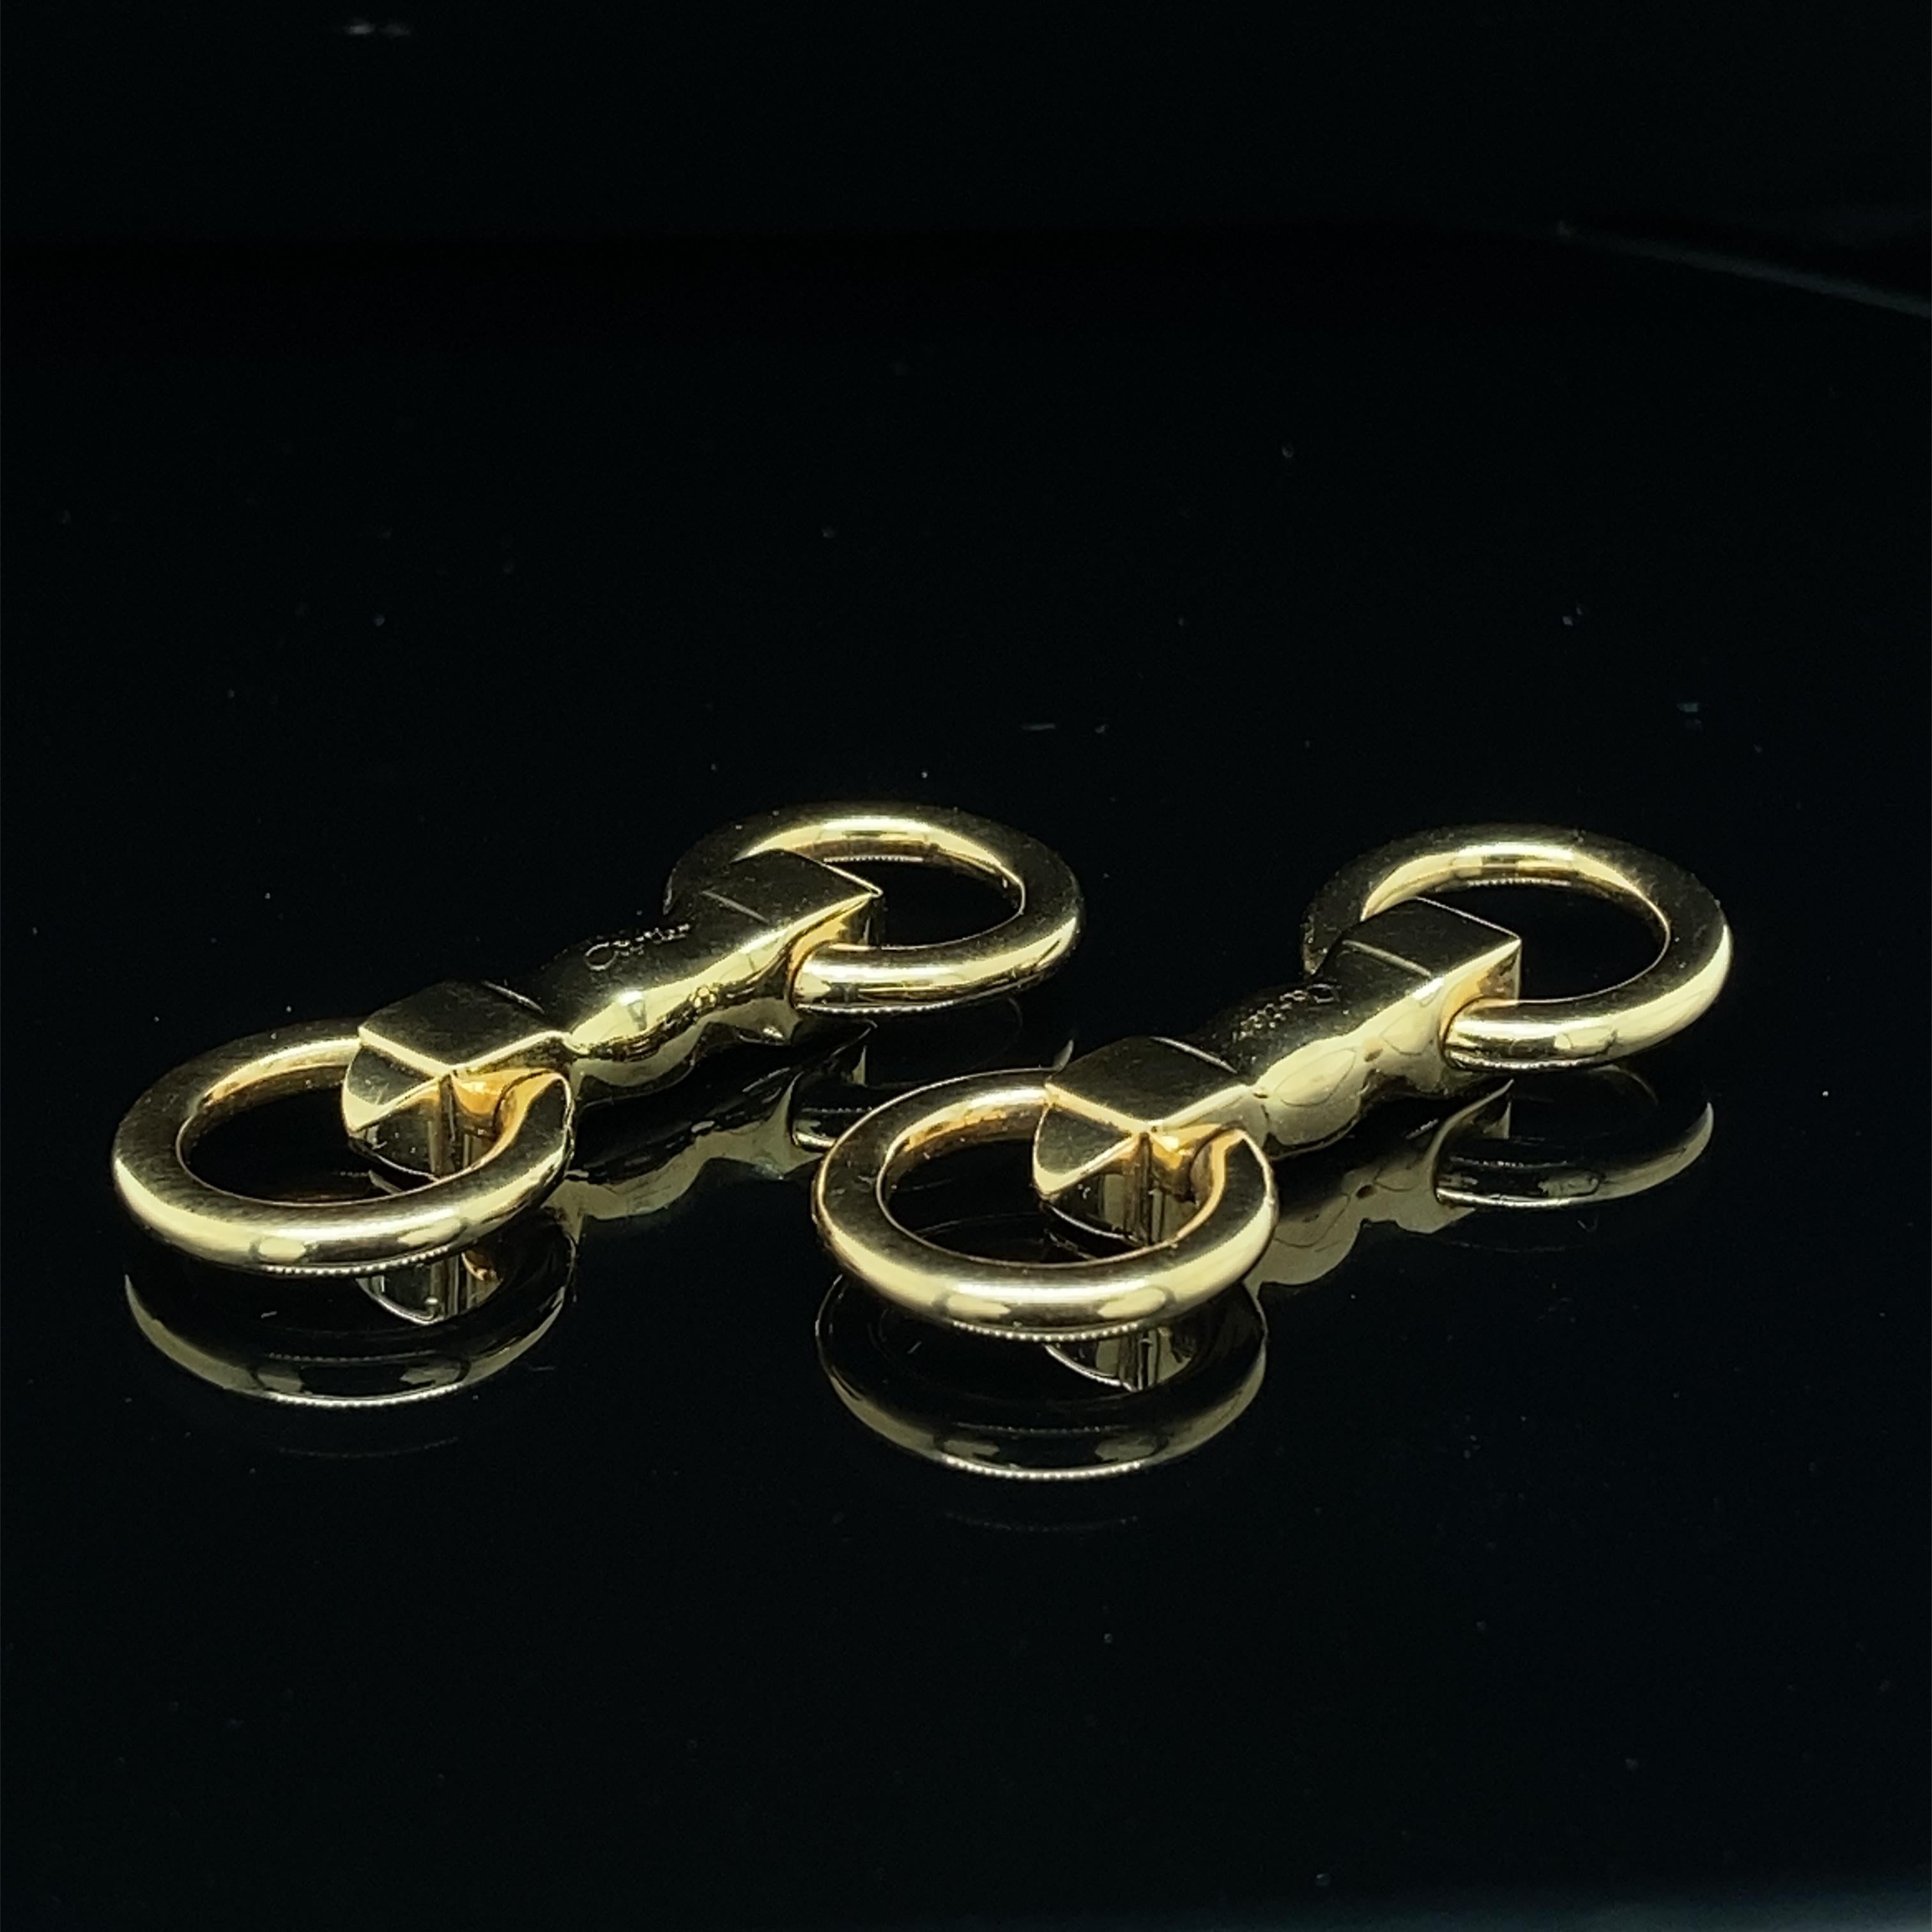 18k yellow gold Cartier cufflinks, ca 1980, each with a solid bar with pyramid-endings holding two rings with clip mechanism. 
Signed and numbered: Cartier 947795.
Length: 3.5cm
Weight: 12g
In very good condition and of very good, solid quality.